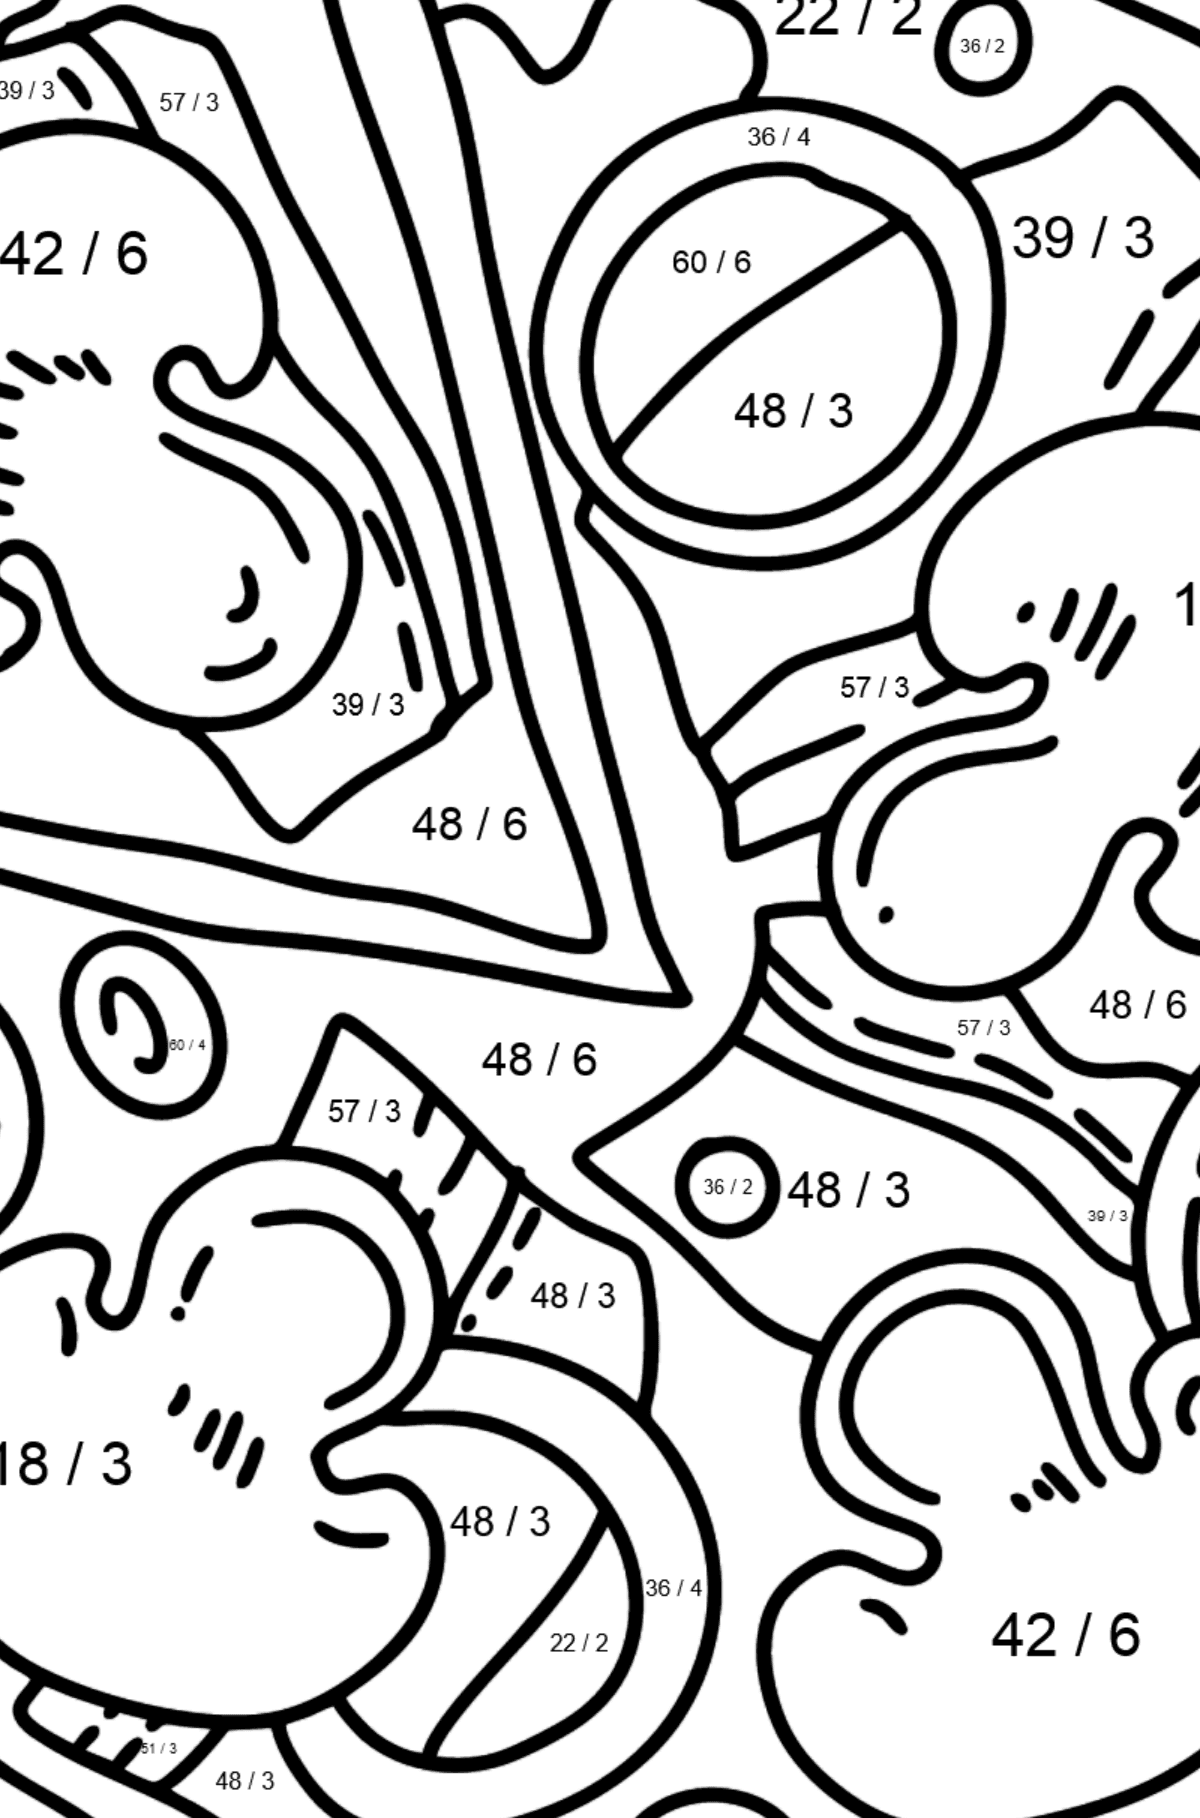 Pizza with Mushrooms coloring page - Math Coloring - Division for Kids